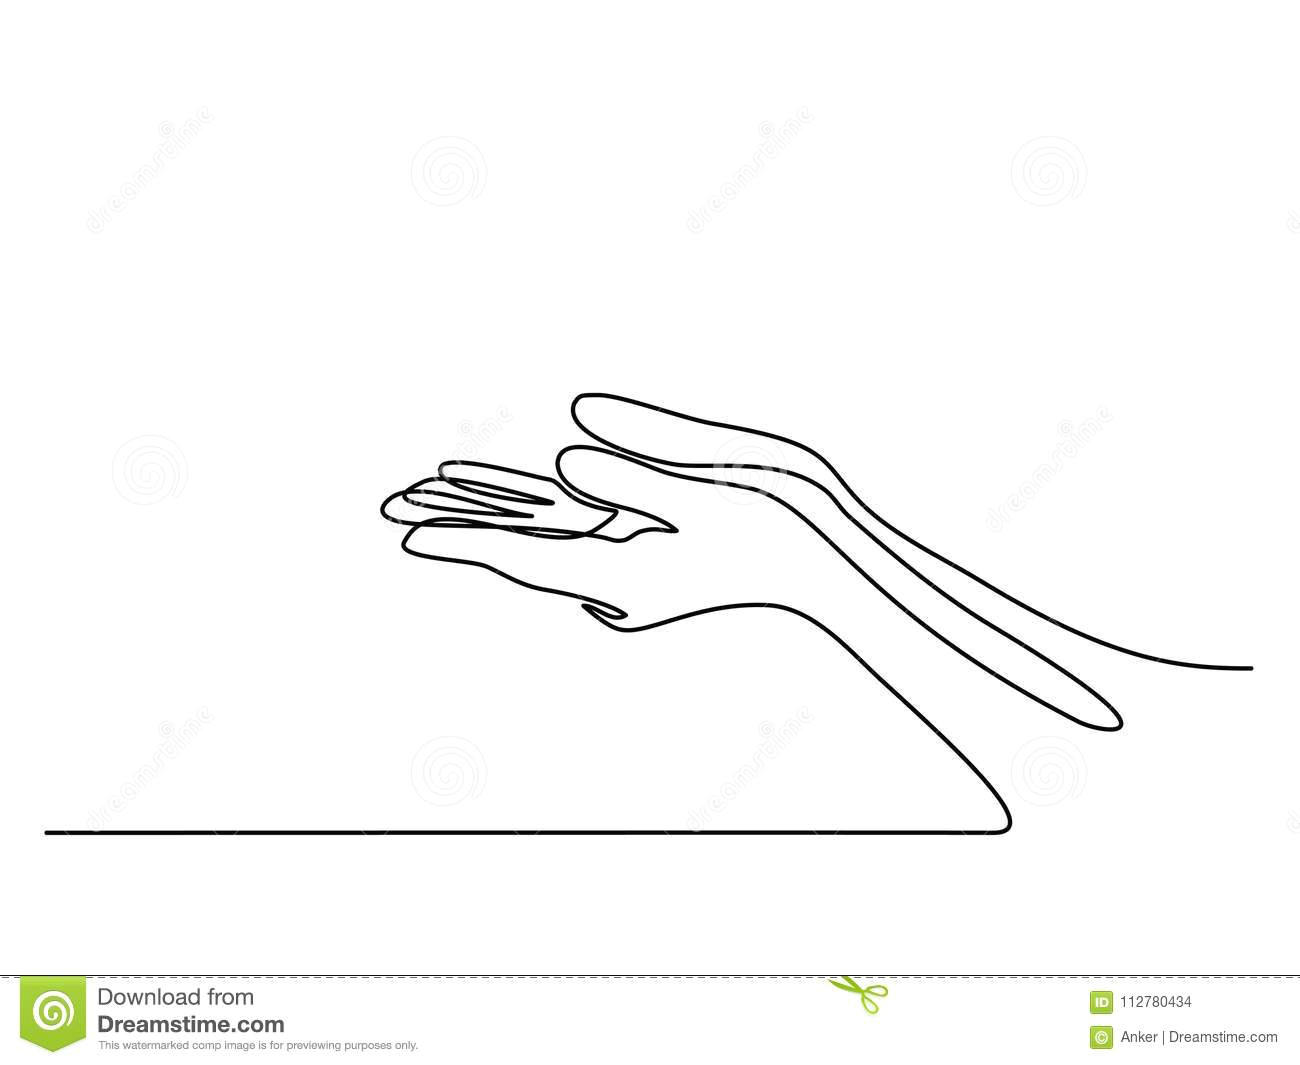 Drawings Of Hands together Hands Palms together Stock Vector Illustration Of Lineart 112780434